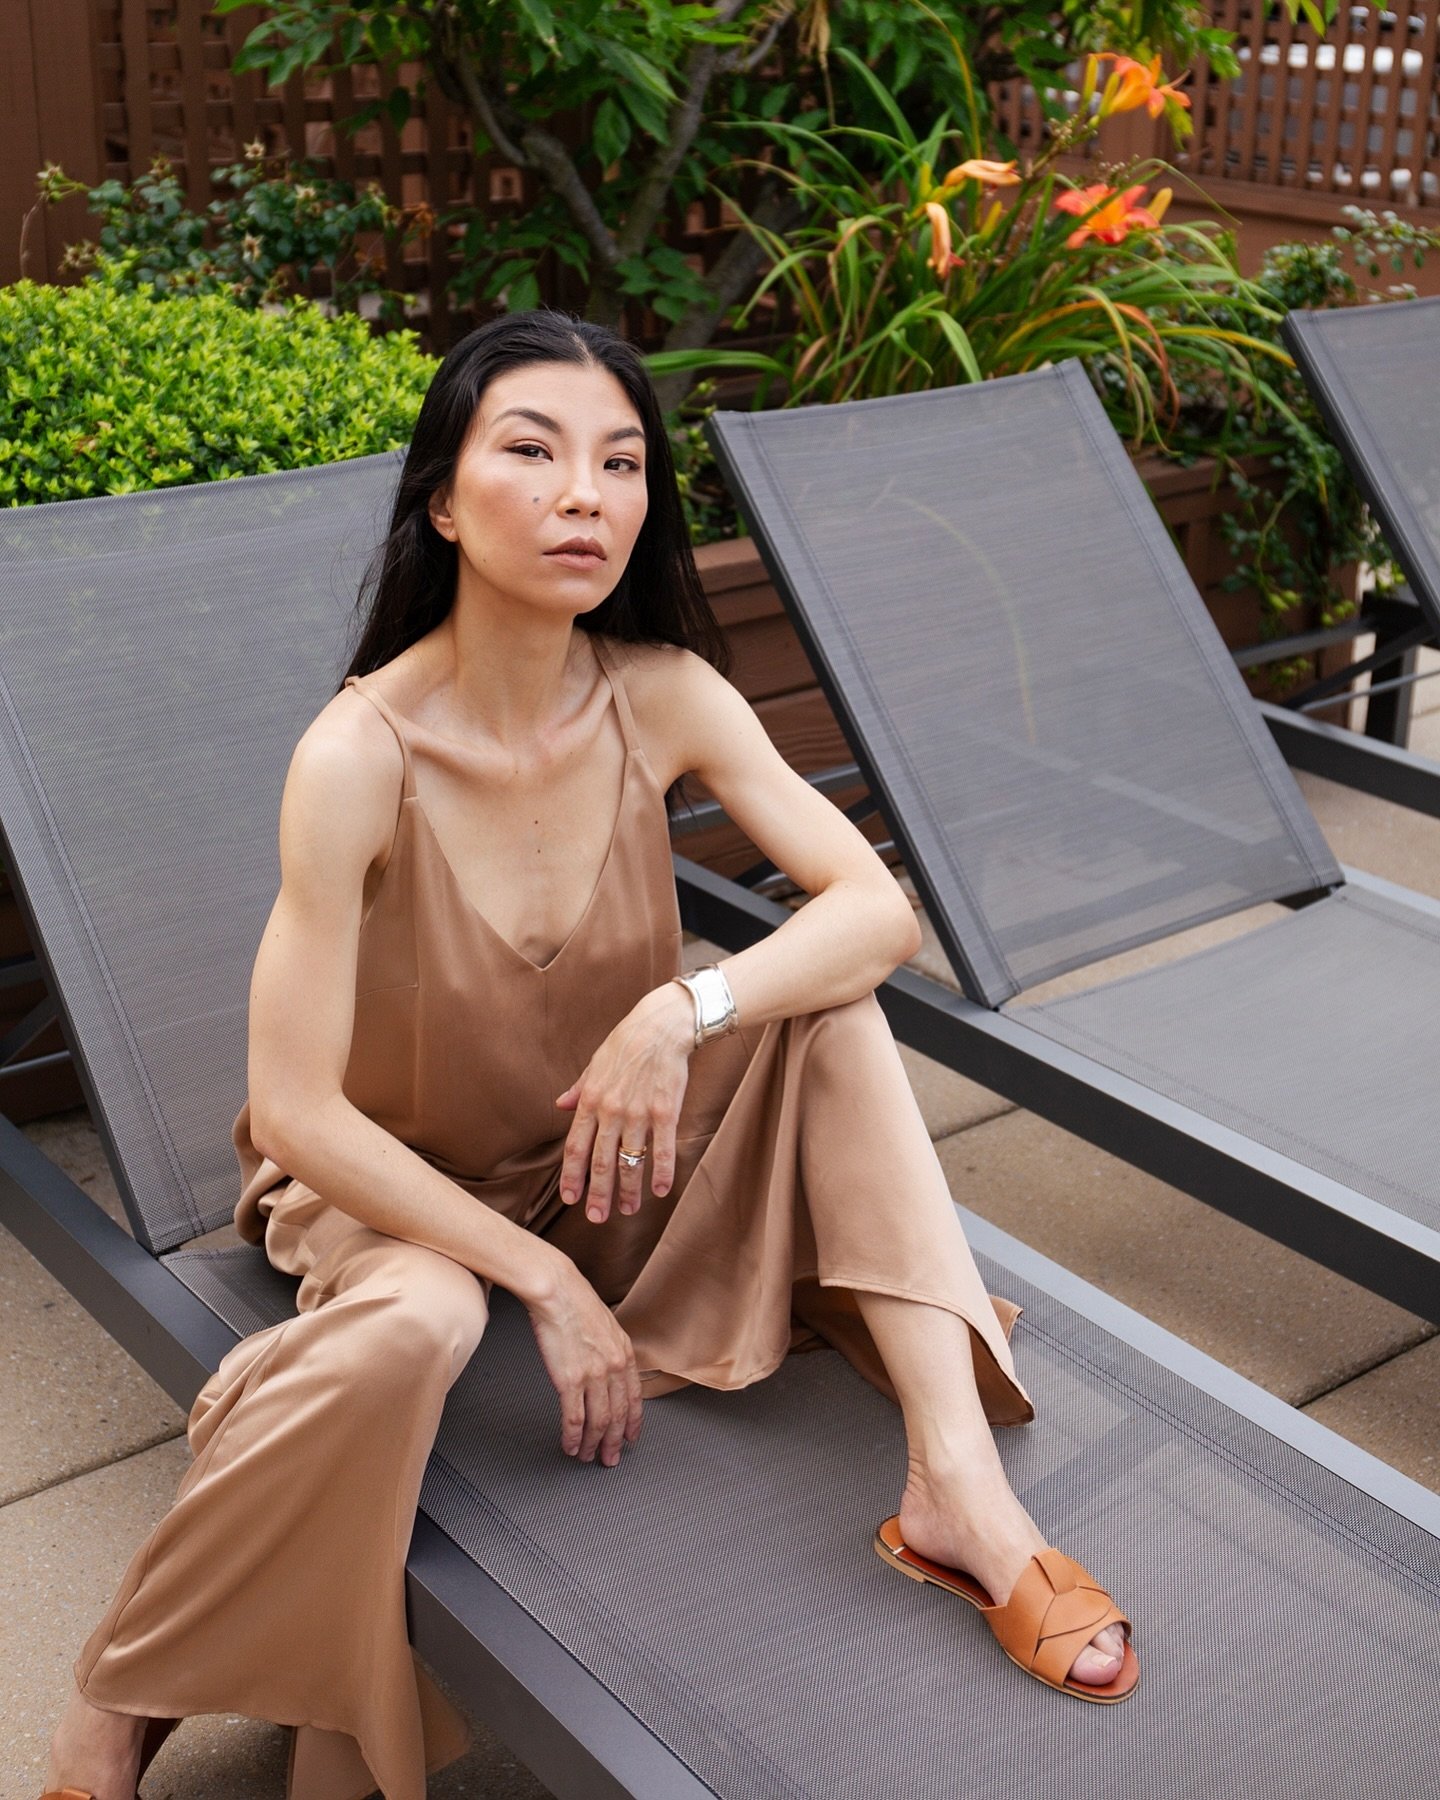 Let the long weekend begin! One of my favorite sleepwear lines that is both luxurious and laidback is @lunya. Get ready for the best pajamas of your life that feels as good in bed as it looks! With innovative fabrics and functional silhouettes design